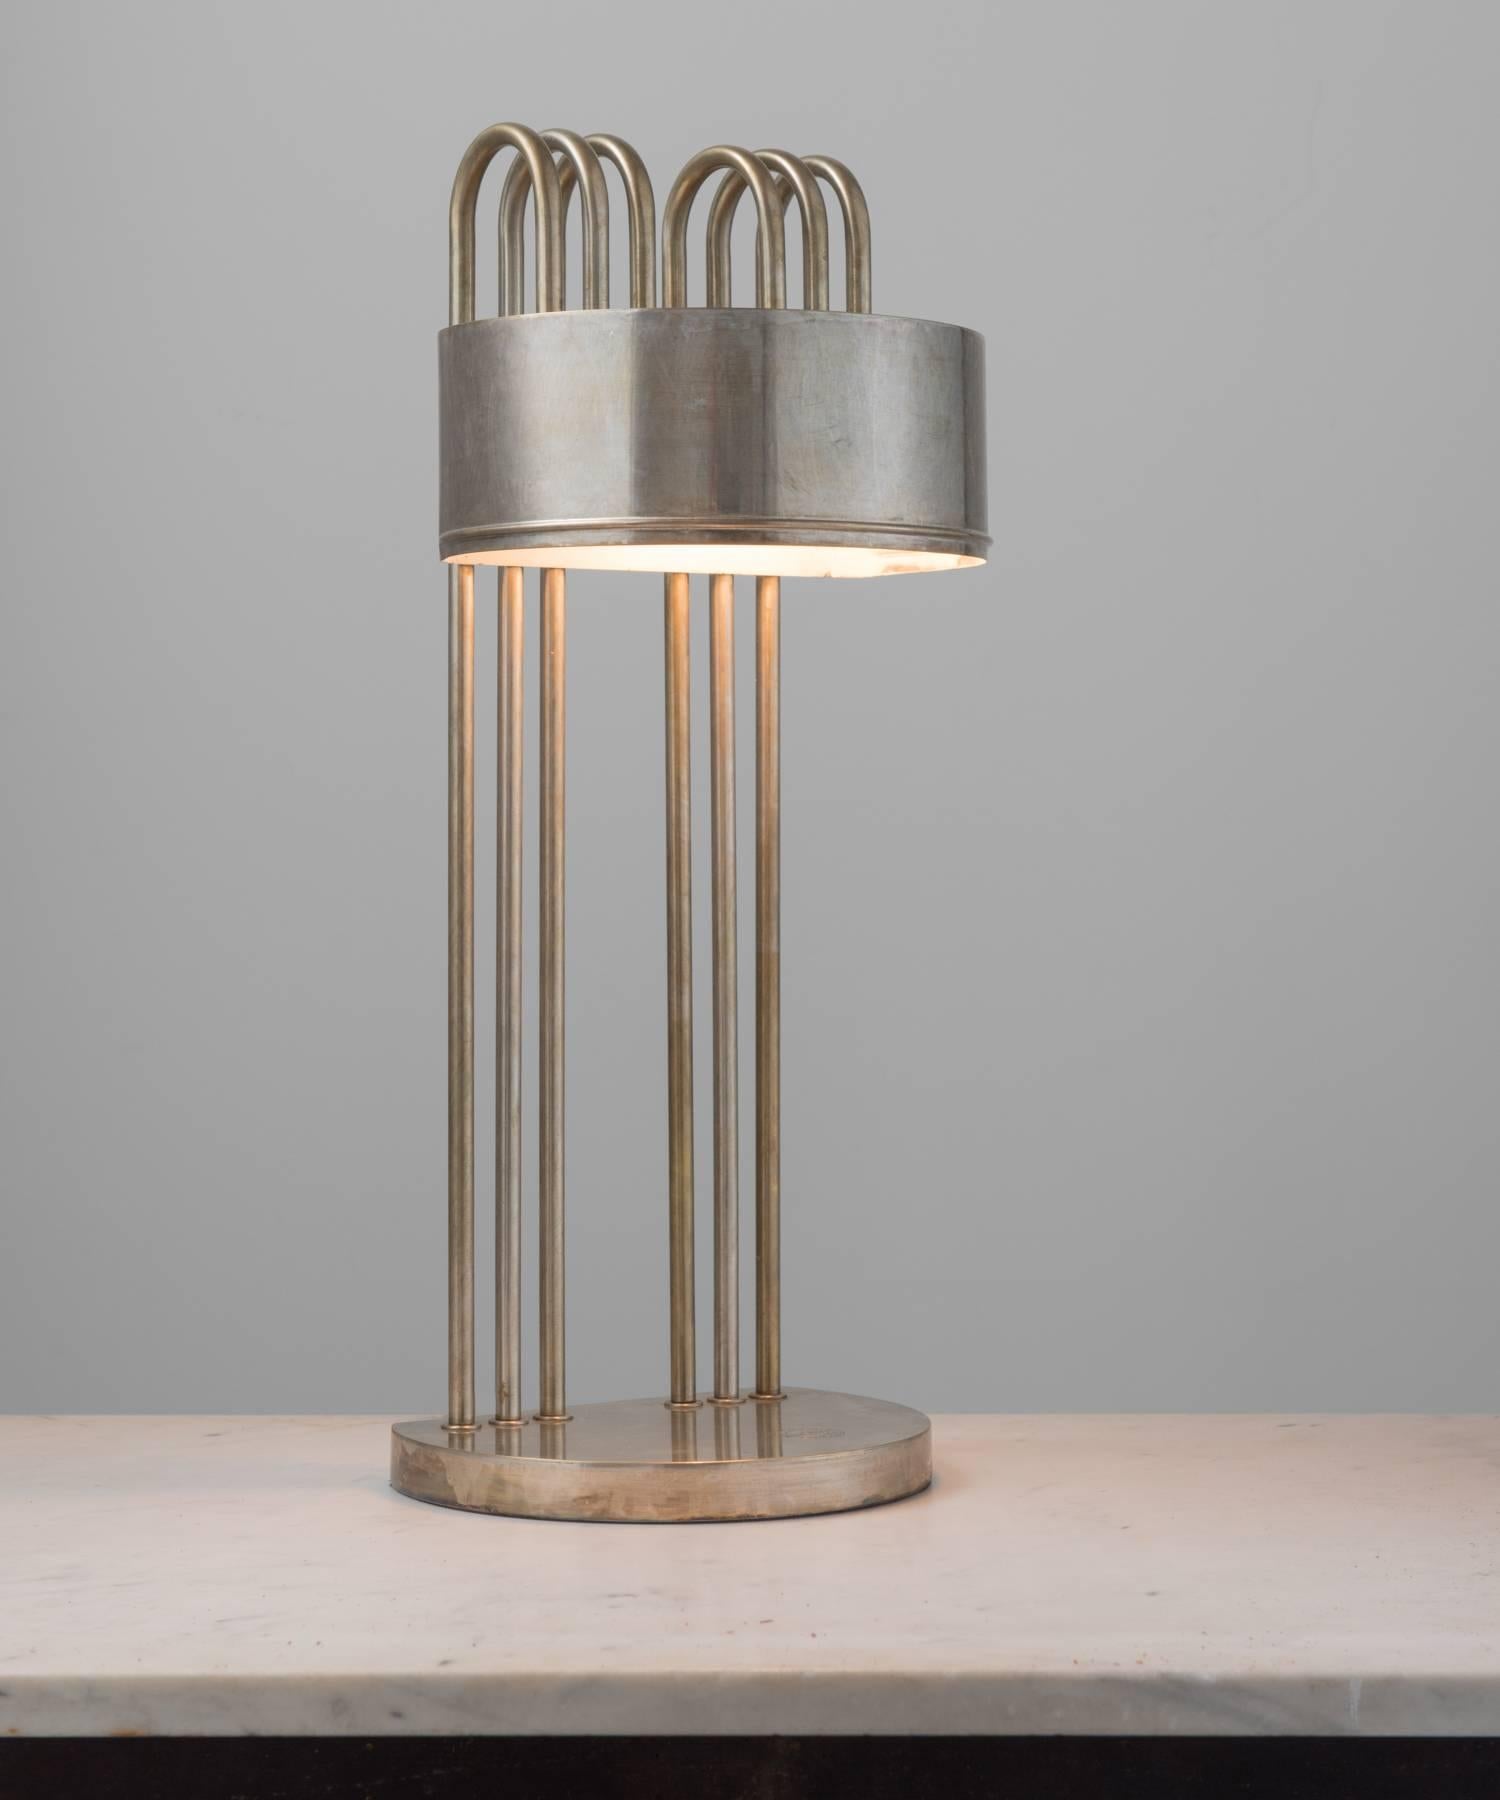 Marcel Breuer desk lamp, made in Germany, circa 1925.

Created for the International exposition of modern Industrial and decorative arts, in Paris, brass plated nickel and stamped “Exposition Paris, 1925”.